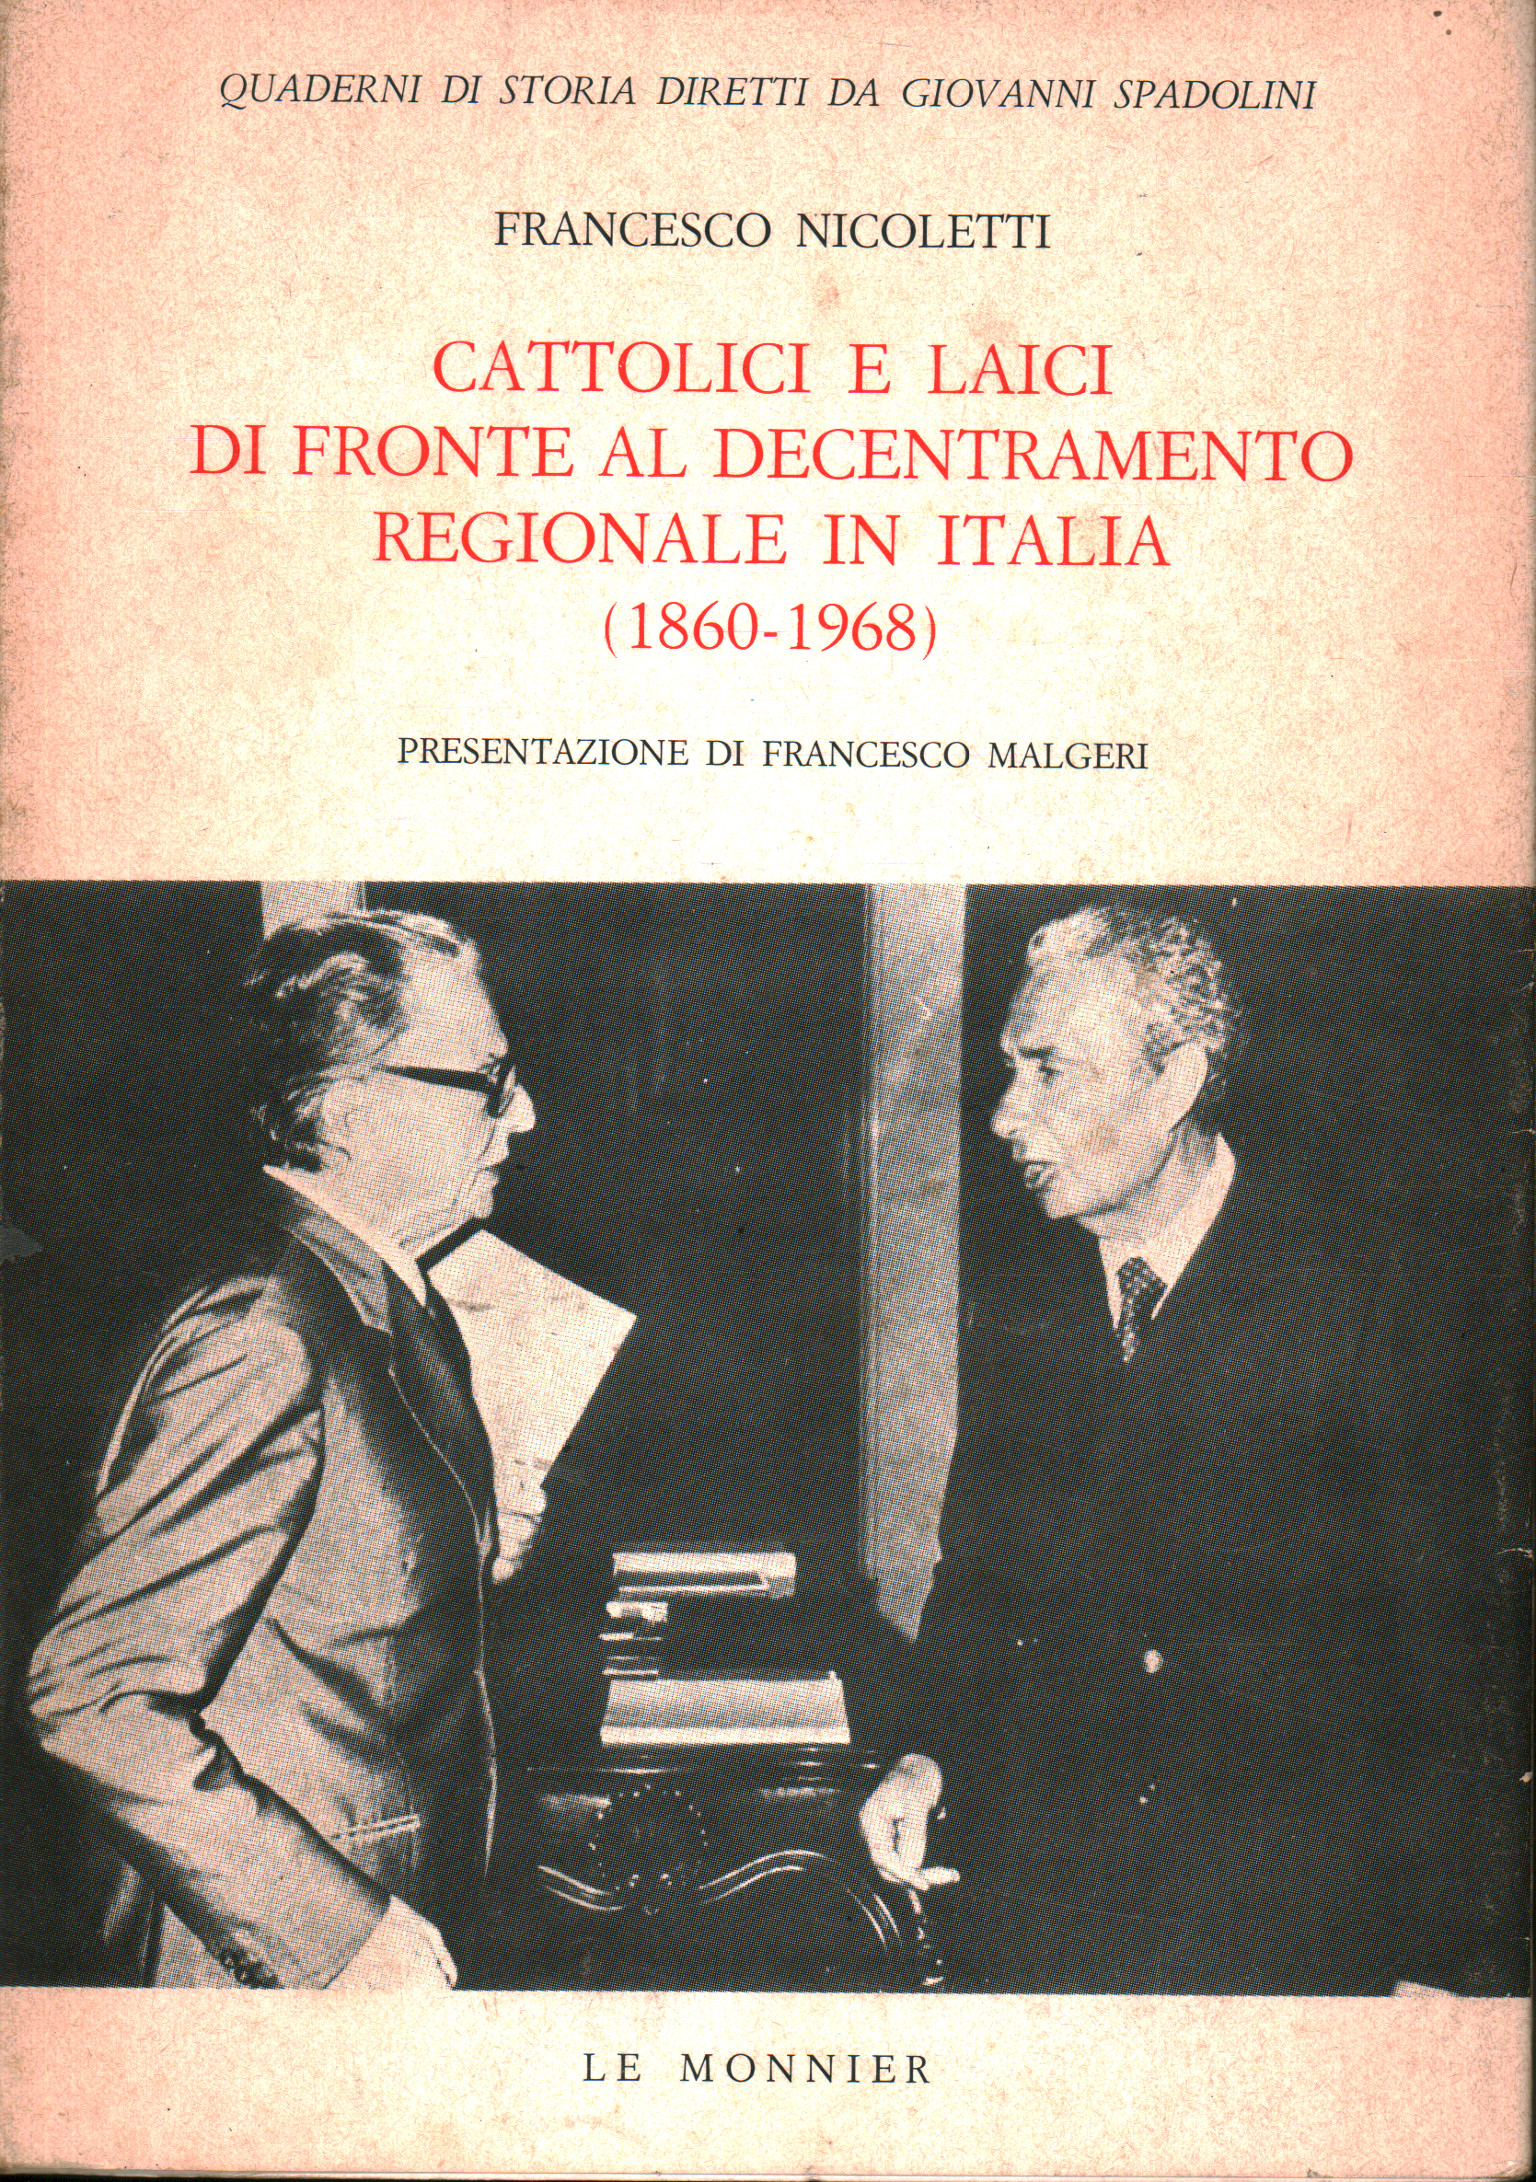 Catholics and lay in front of the decentralisation regio, Francesco Nicoletti